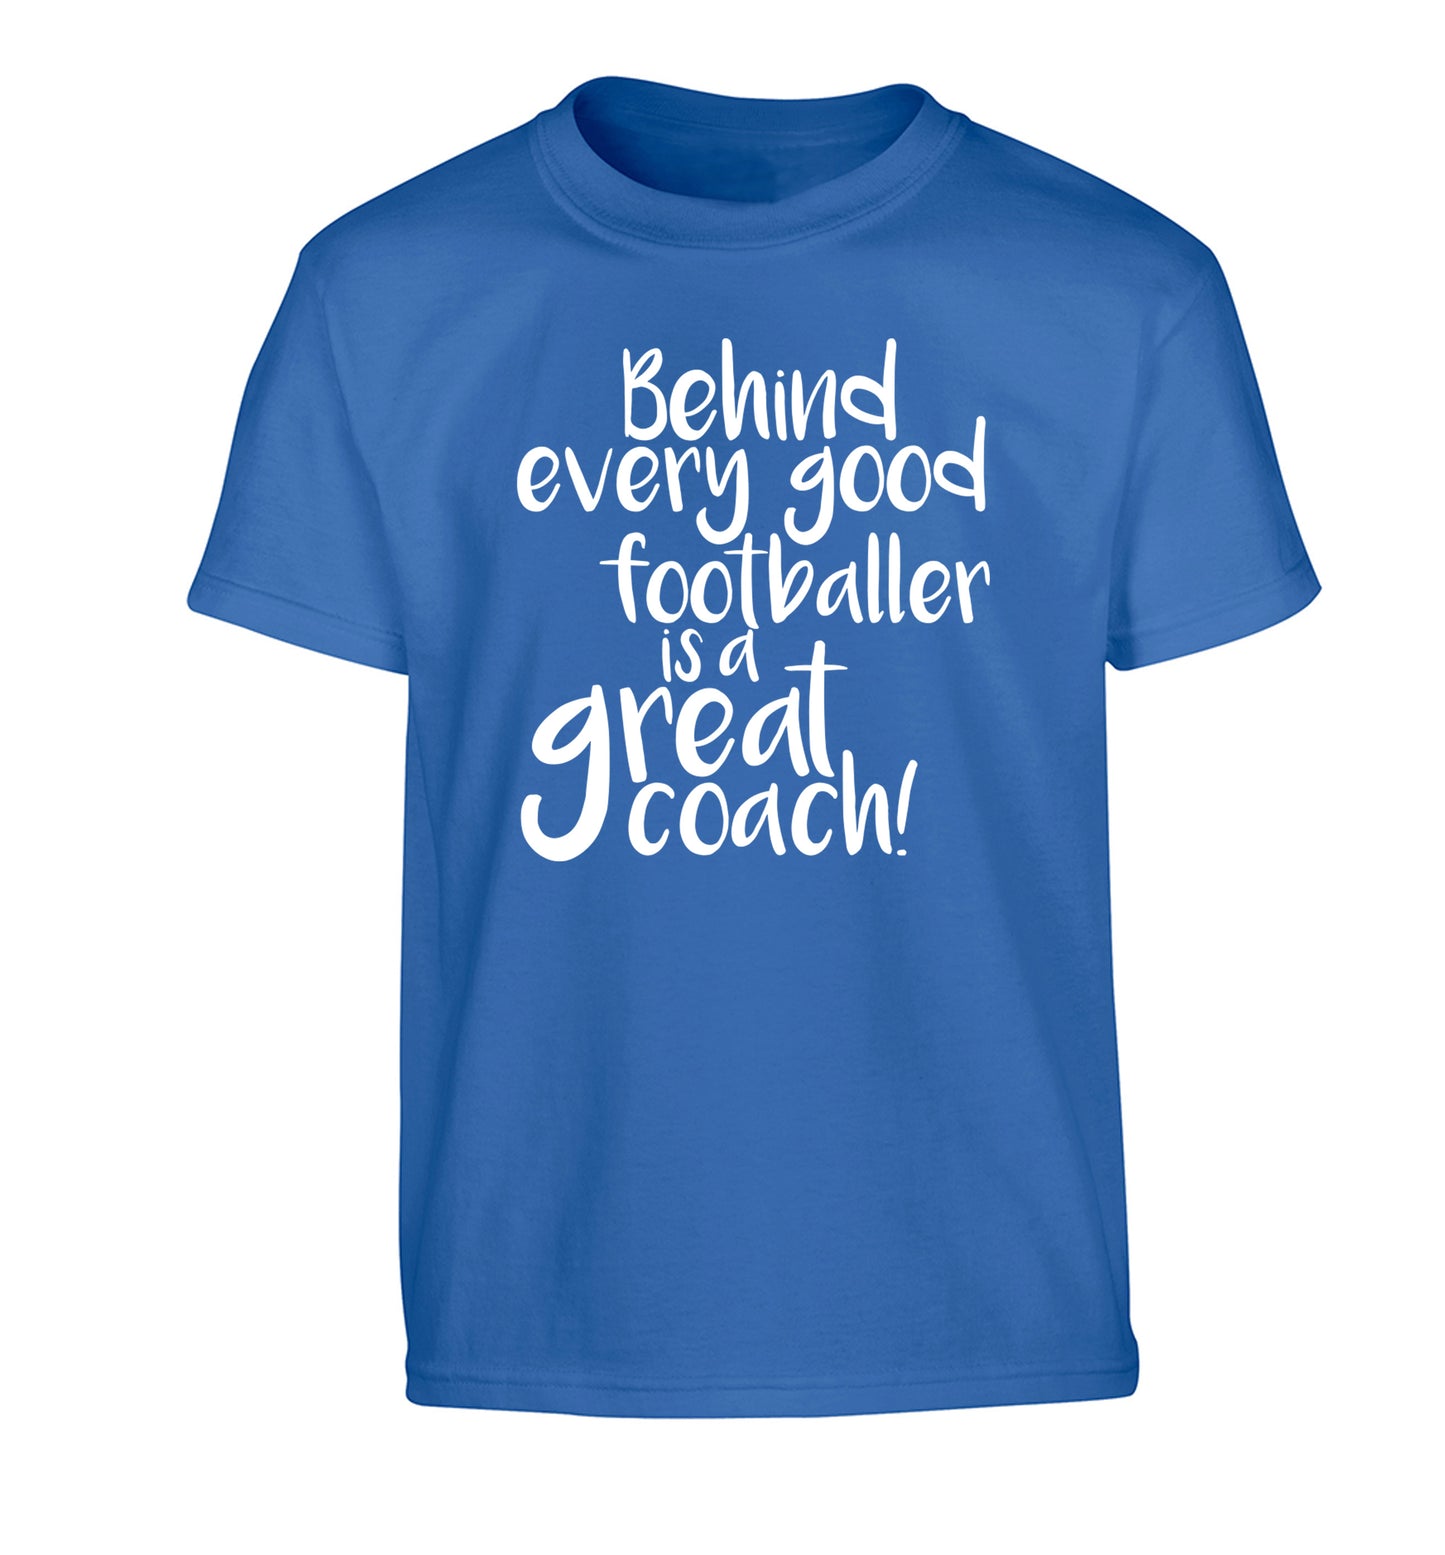 Behind every good footballer is a great coach! Children's blue Tshirt 12-14 Years